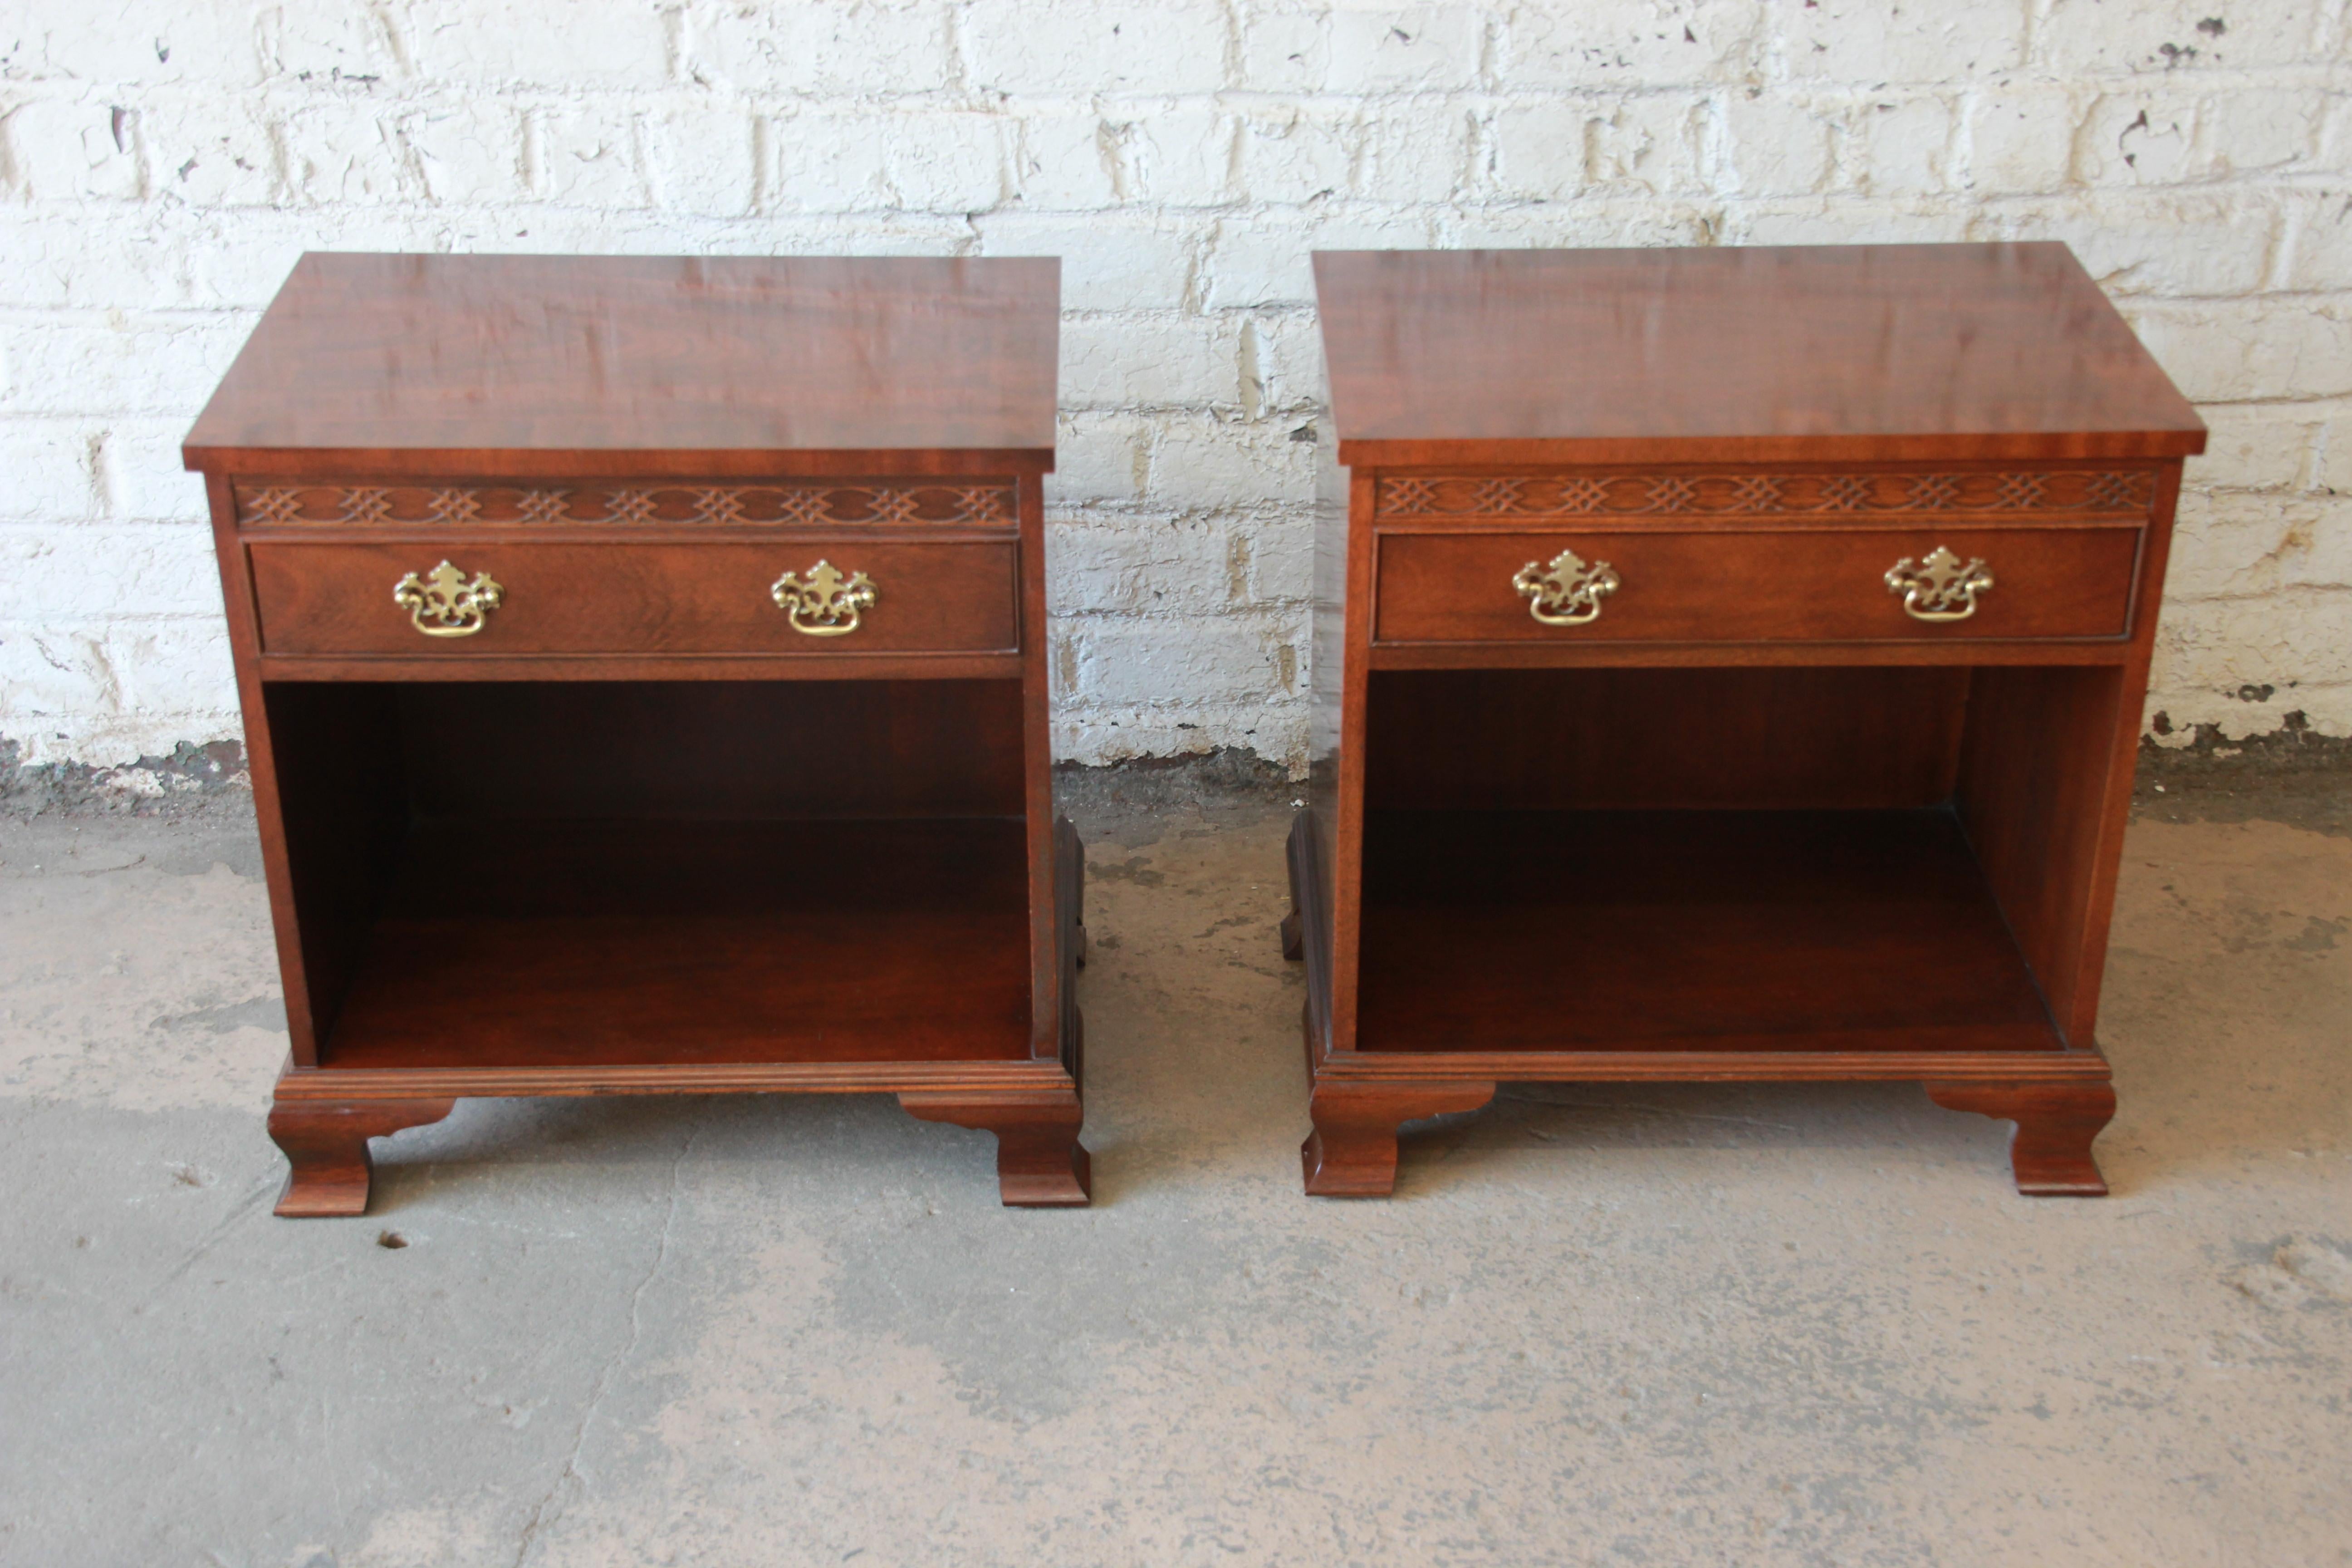 Offering a very nice pair of Baker Furniture mahogany Chippendale style nightstands. The nightstand have a beautiful mahogany wood grain with a banded edge top. There is a drawer that opens and closes smooth with a nice open cabinet space with ample